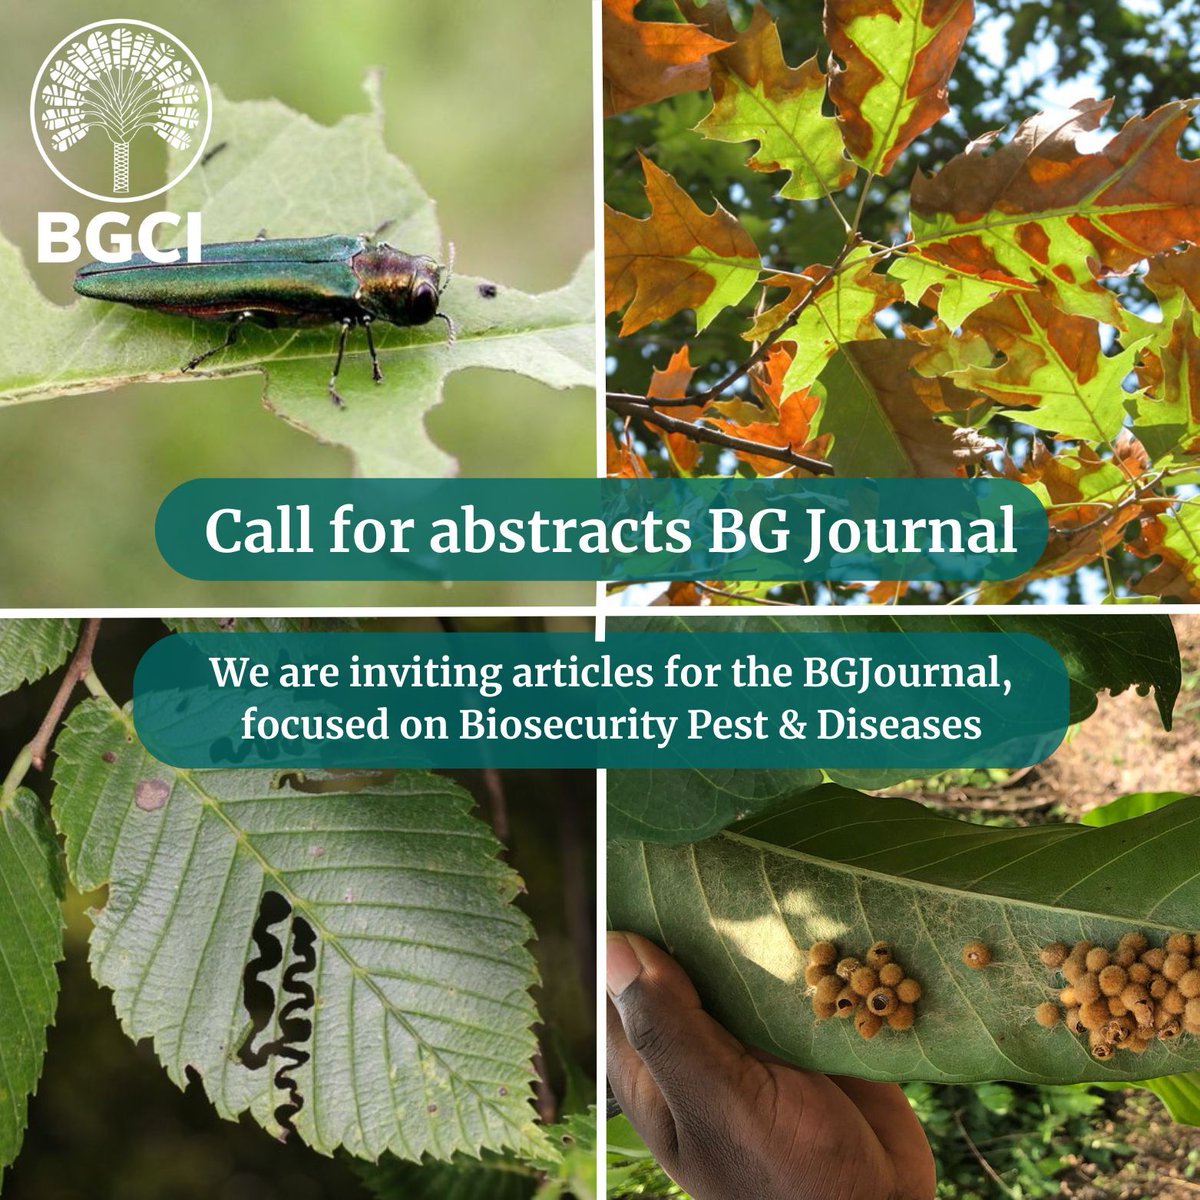 📢📢We are currently inviting articles for our upcoming edition of the BGJournal 📰 An edition focused on Biosecurity, Pest & Diseases in Botanic Gardens🌿🪲🔍 Submit your article proposal before the 18th of May. More info: buff.ly/3UrhS9t #Biosecurity #ProtectPlants